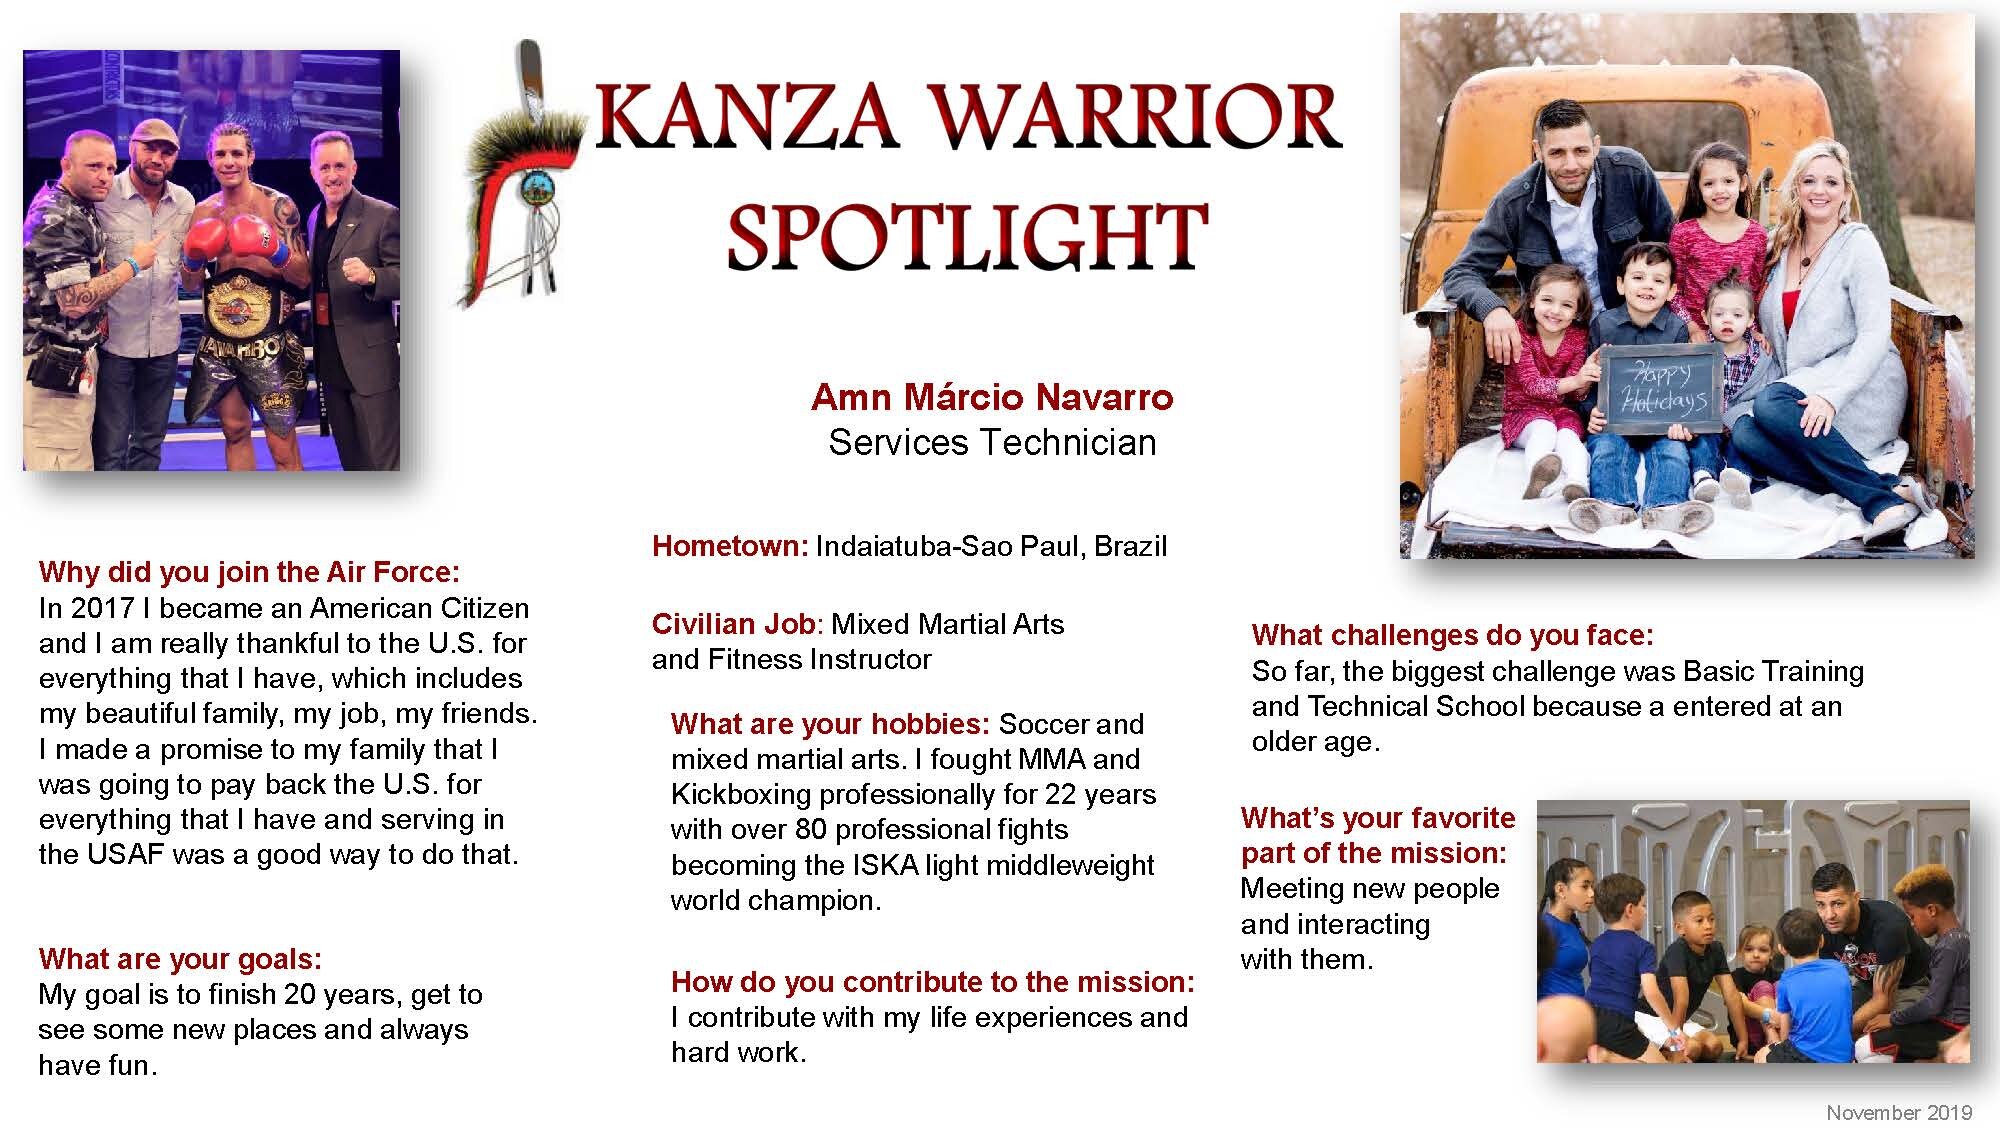 Airman B Márcio Navarro, 931st Force Support Squadron Services technician, is this month's KANZA Warrior Spotlight.